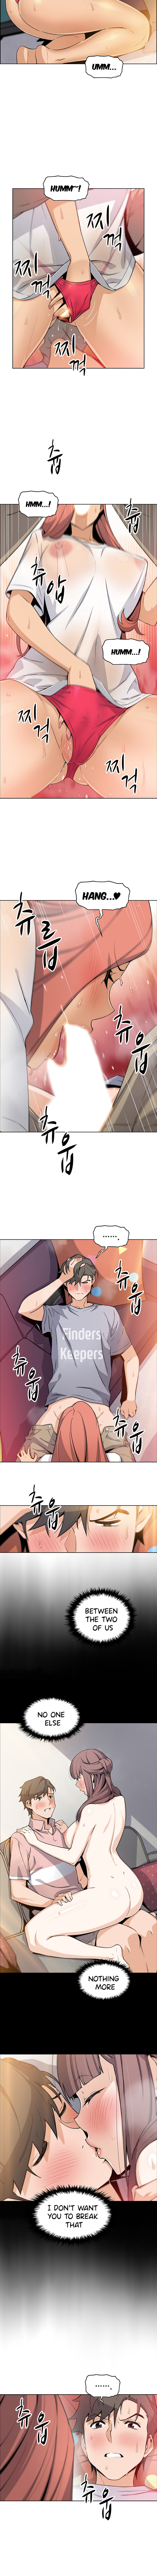 Housekeeper Manhwa - Chapter 41 Page 3